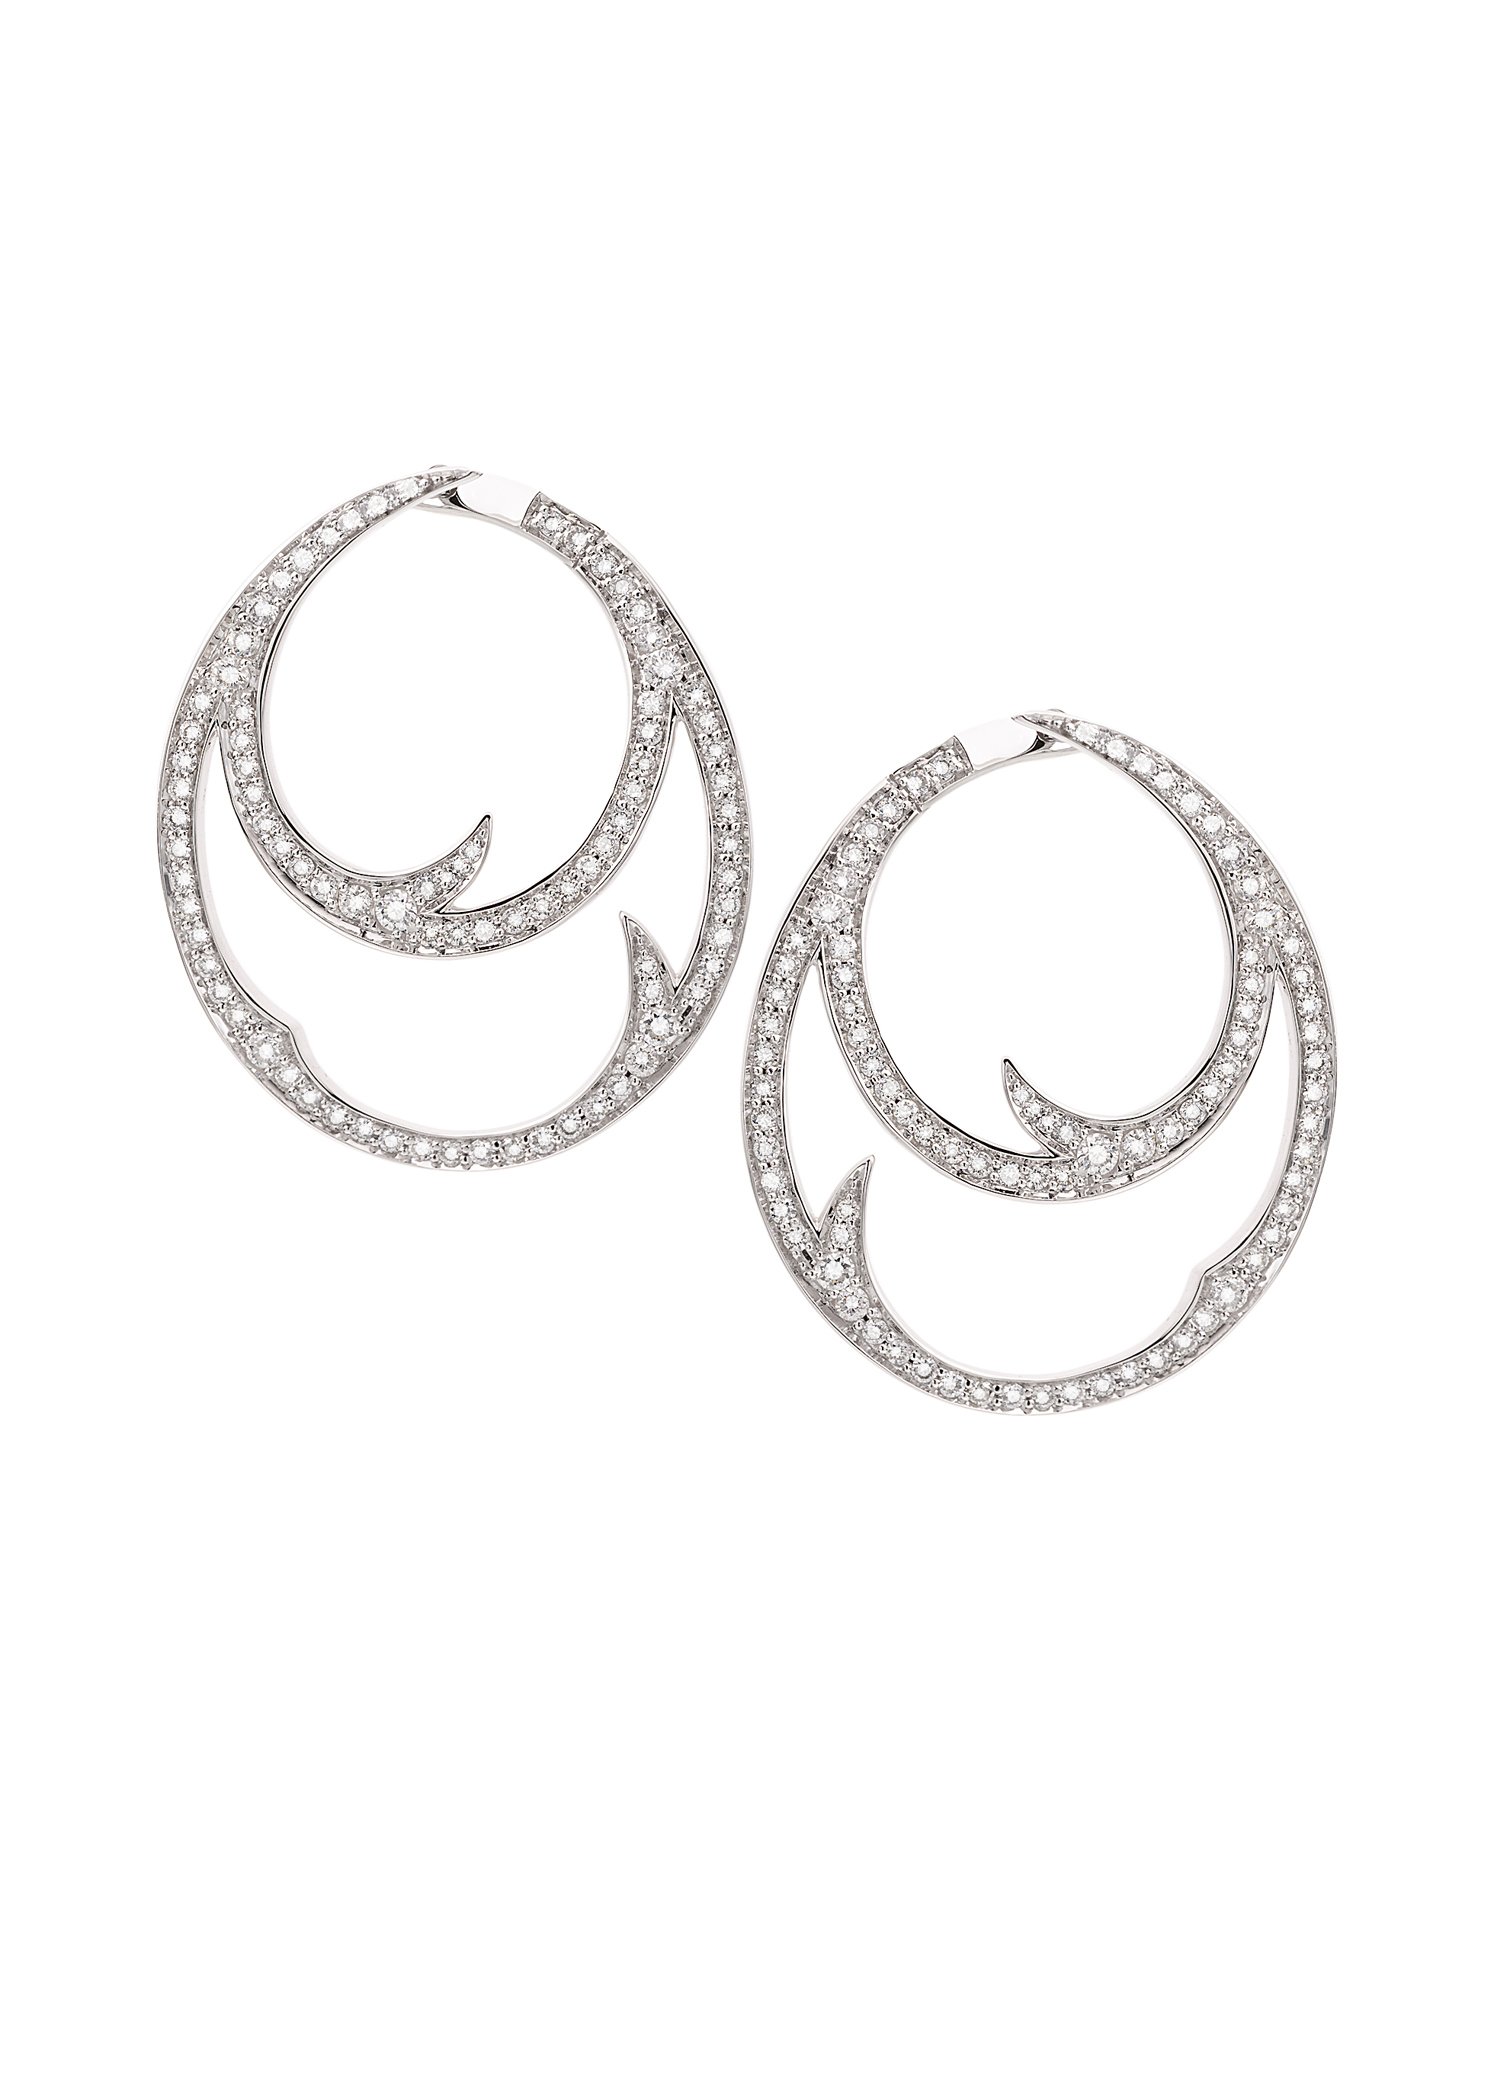 Thorn Stem Double Hoop Earrings with White Diamonds in 18kt White Gold